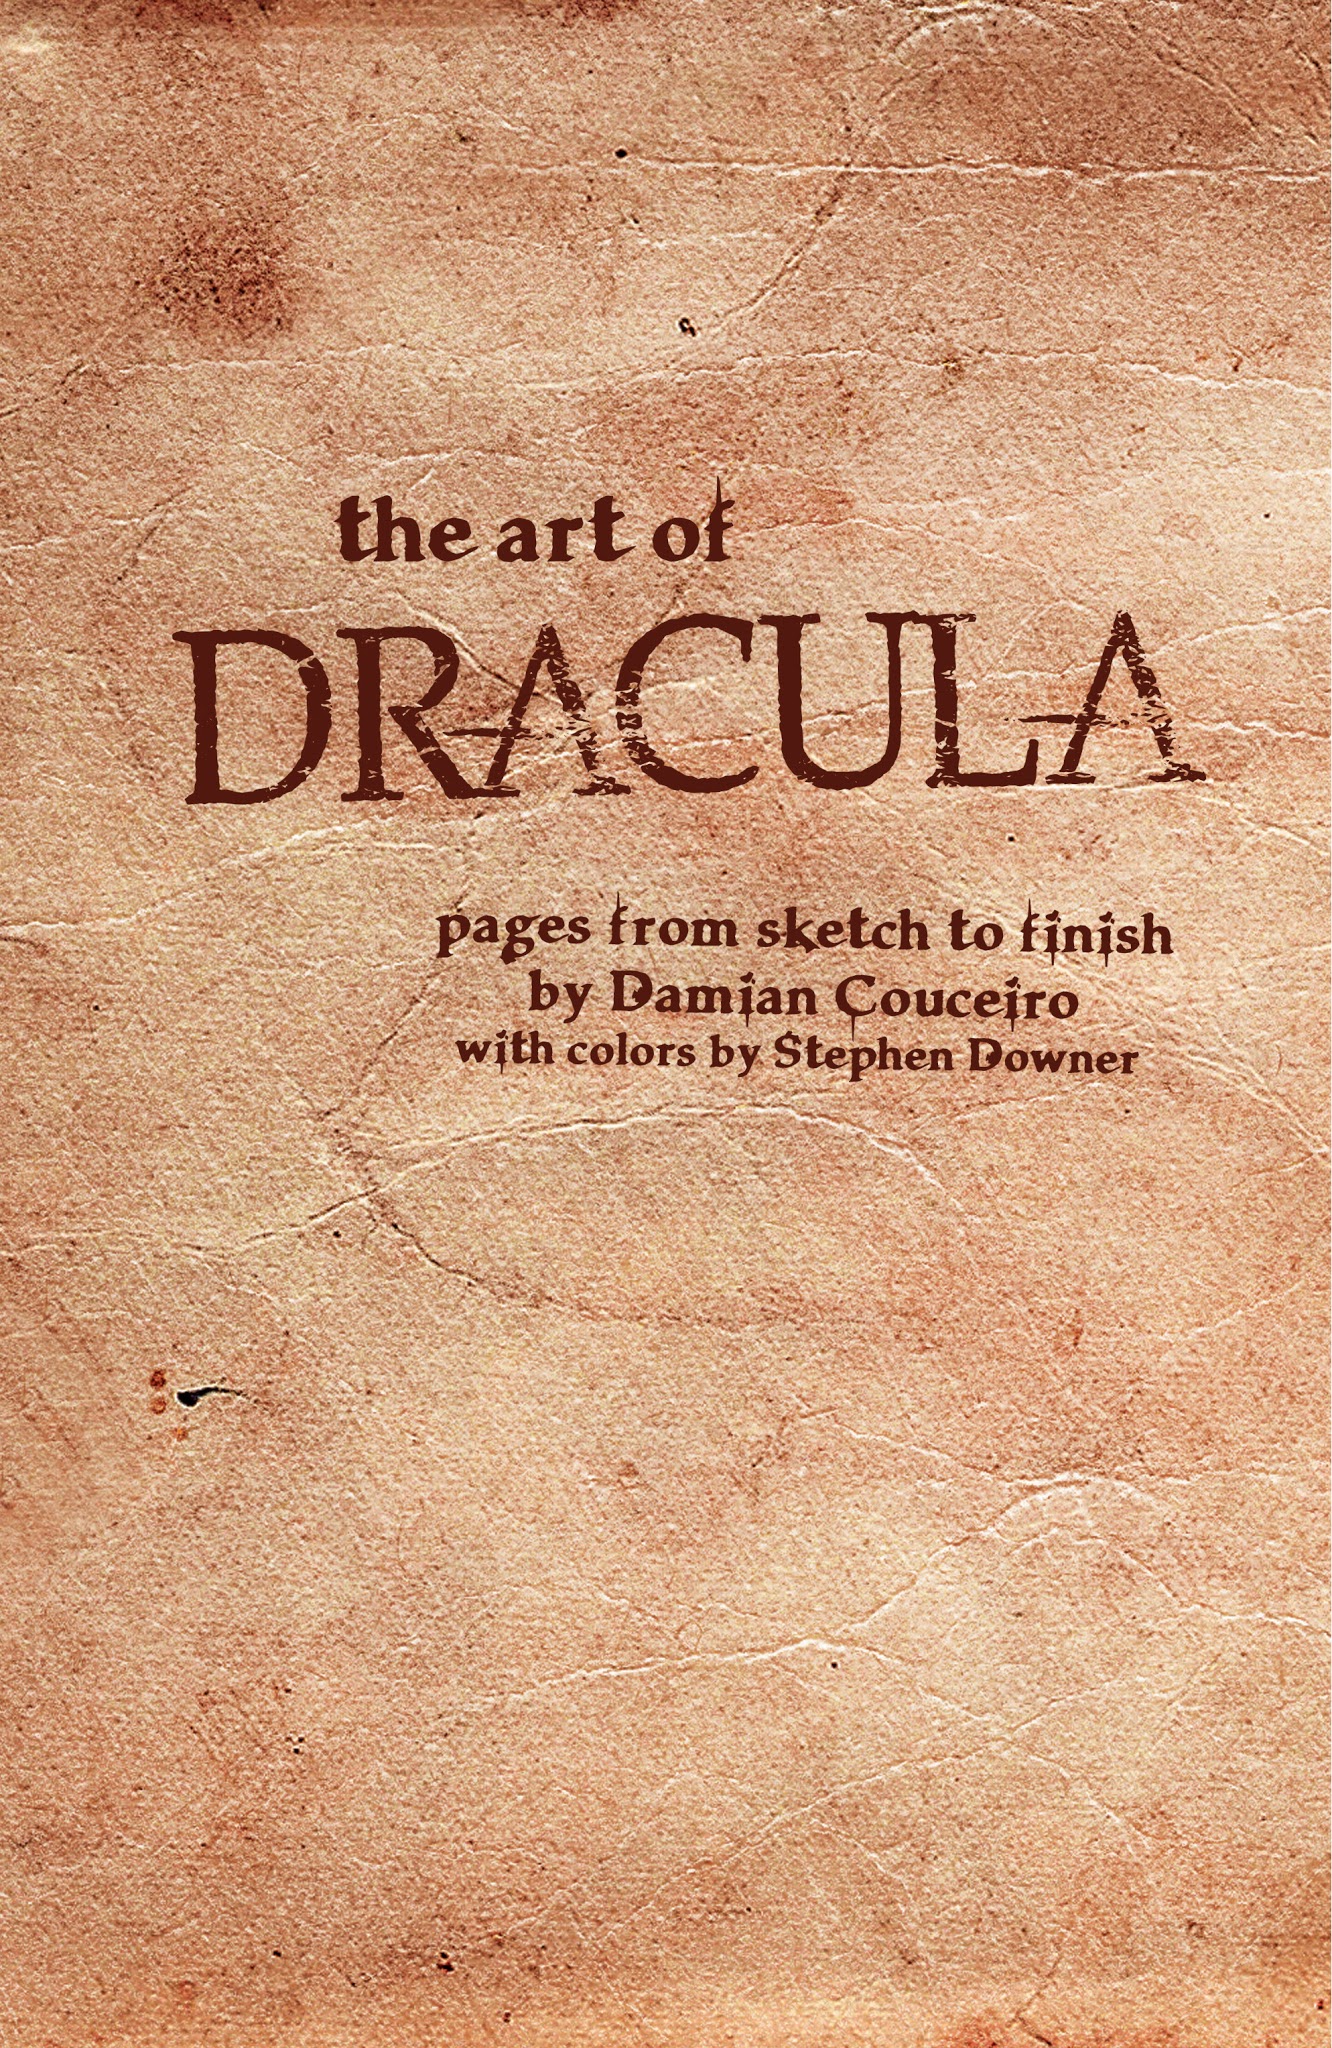 Read online Dracula: The Company of Monsters comic -  Issue # TPB 2 - 101